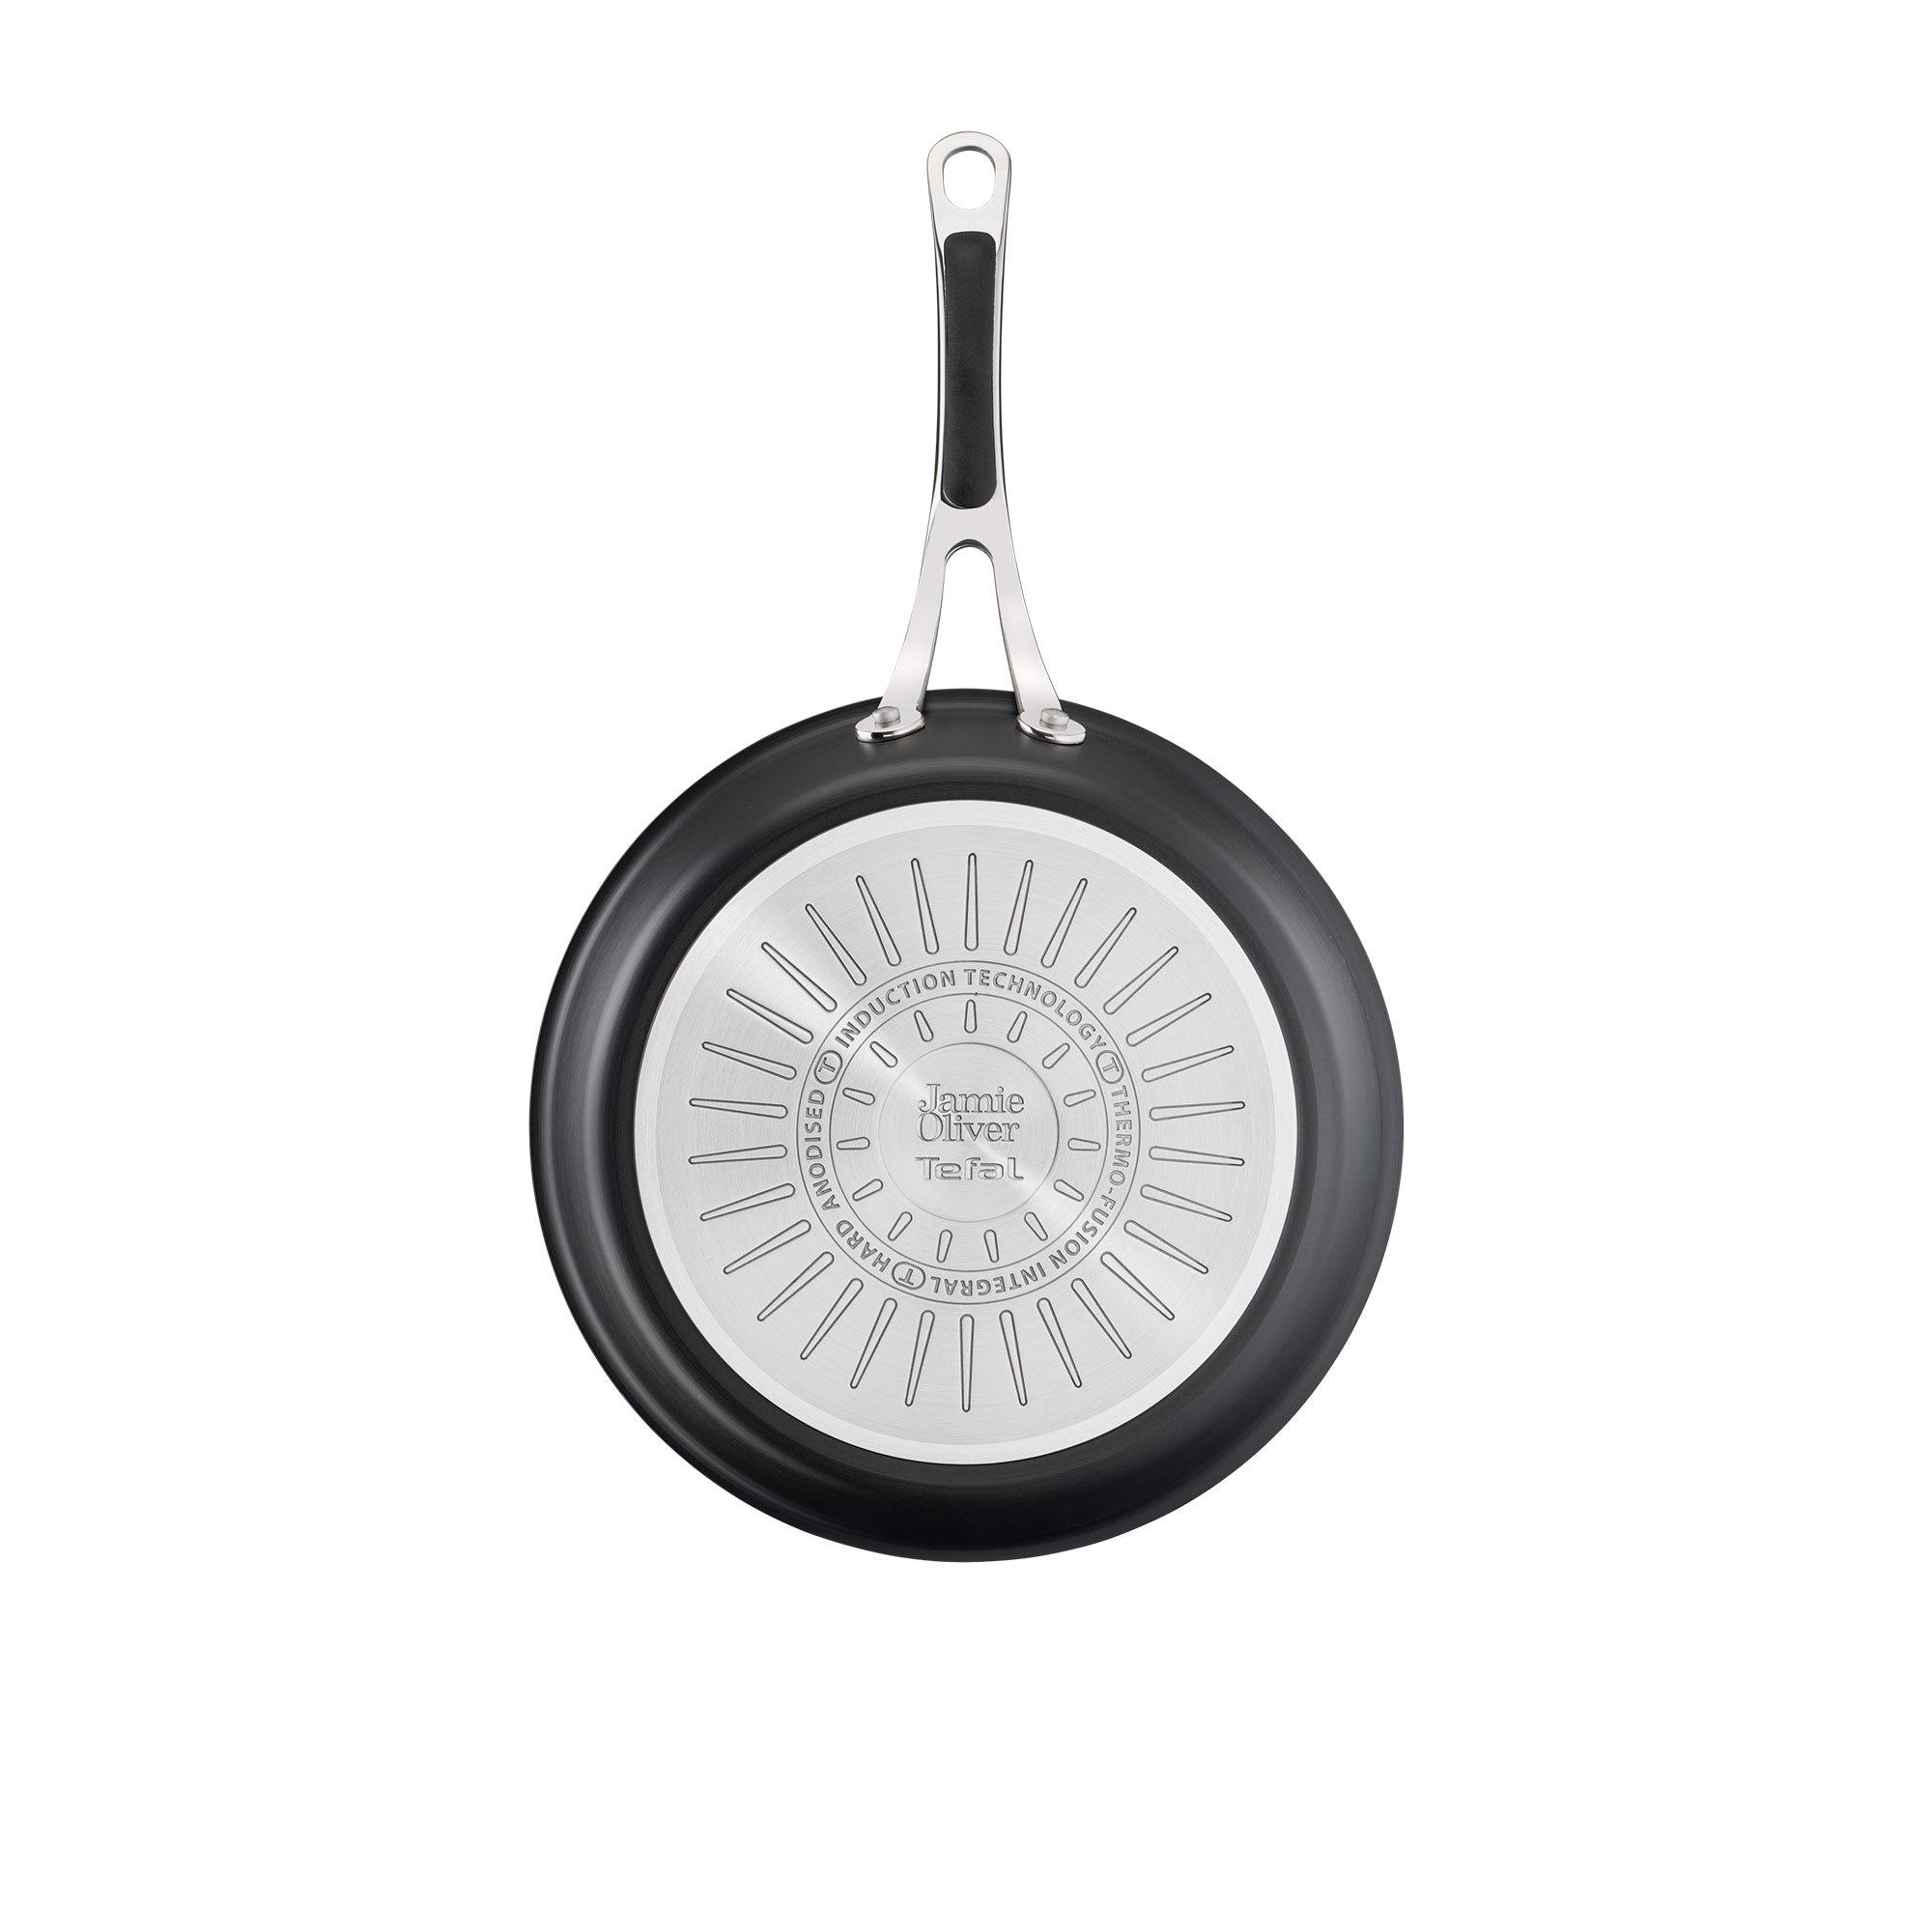 Jamie Oliver by Tefal Cook's Classic Hard Anodised Induction Frypan 30cm Image 4